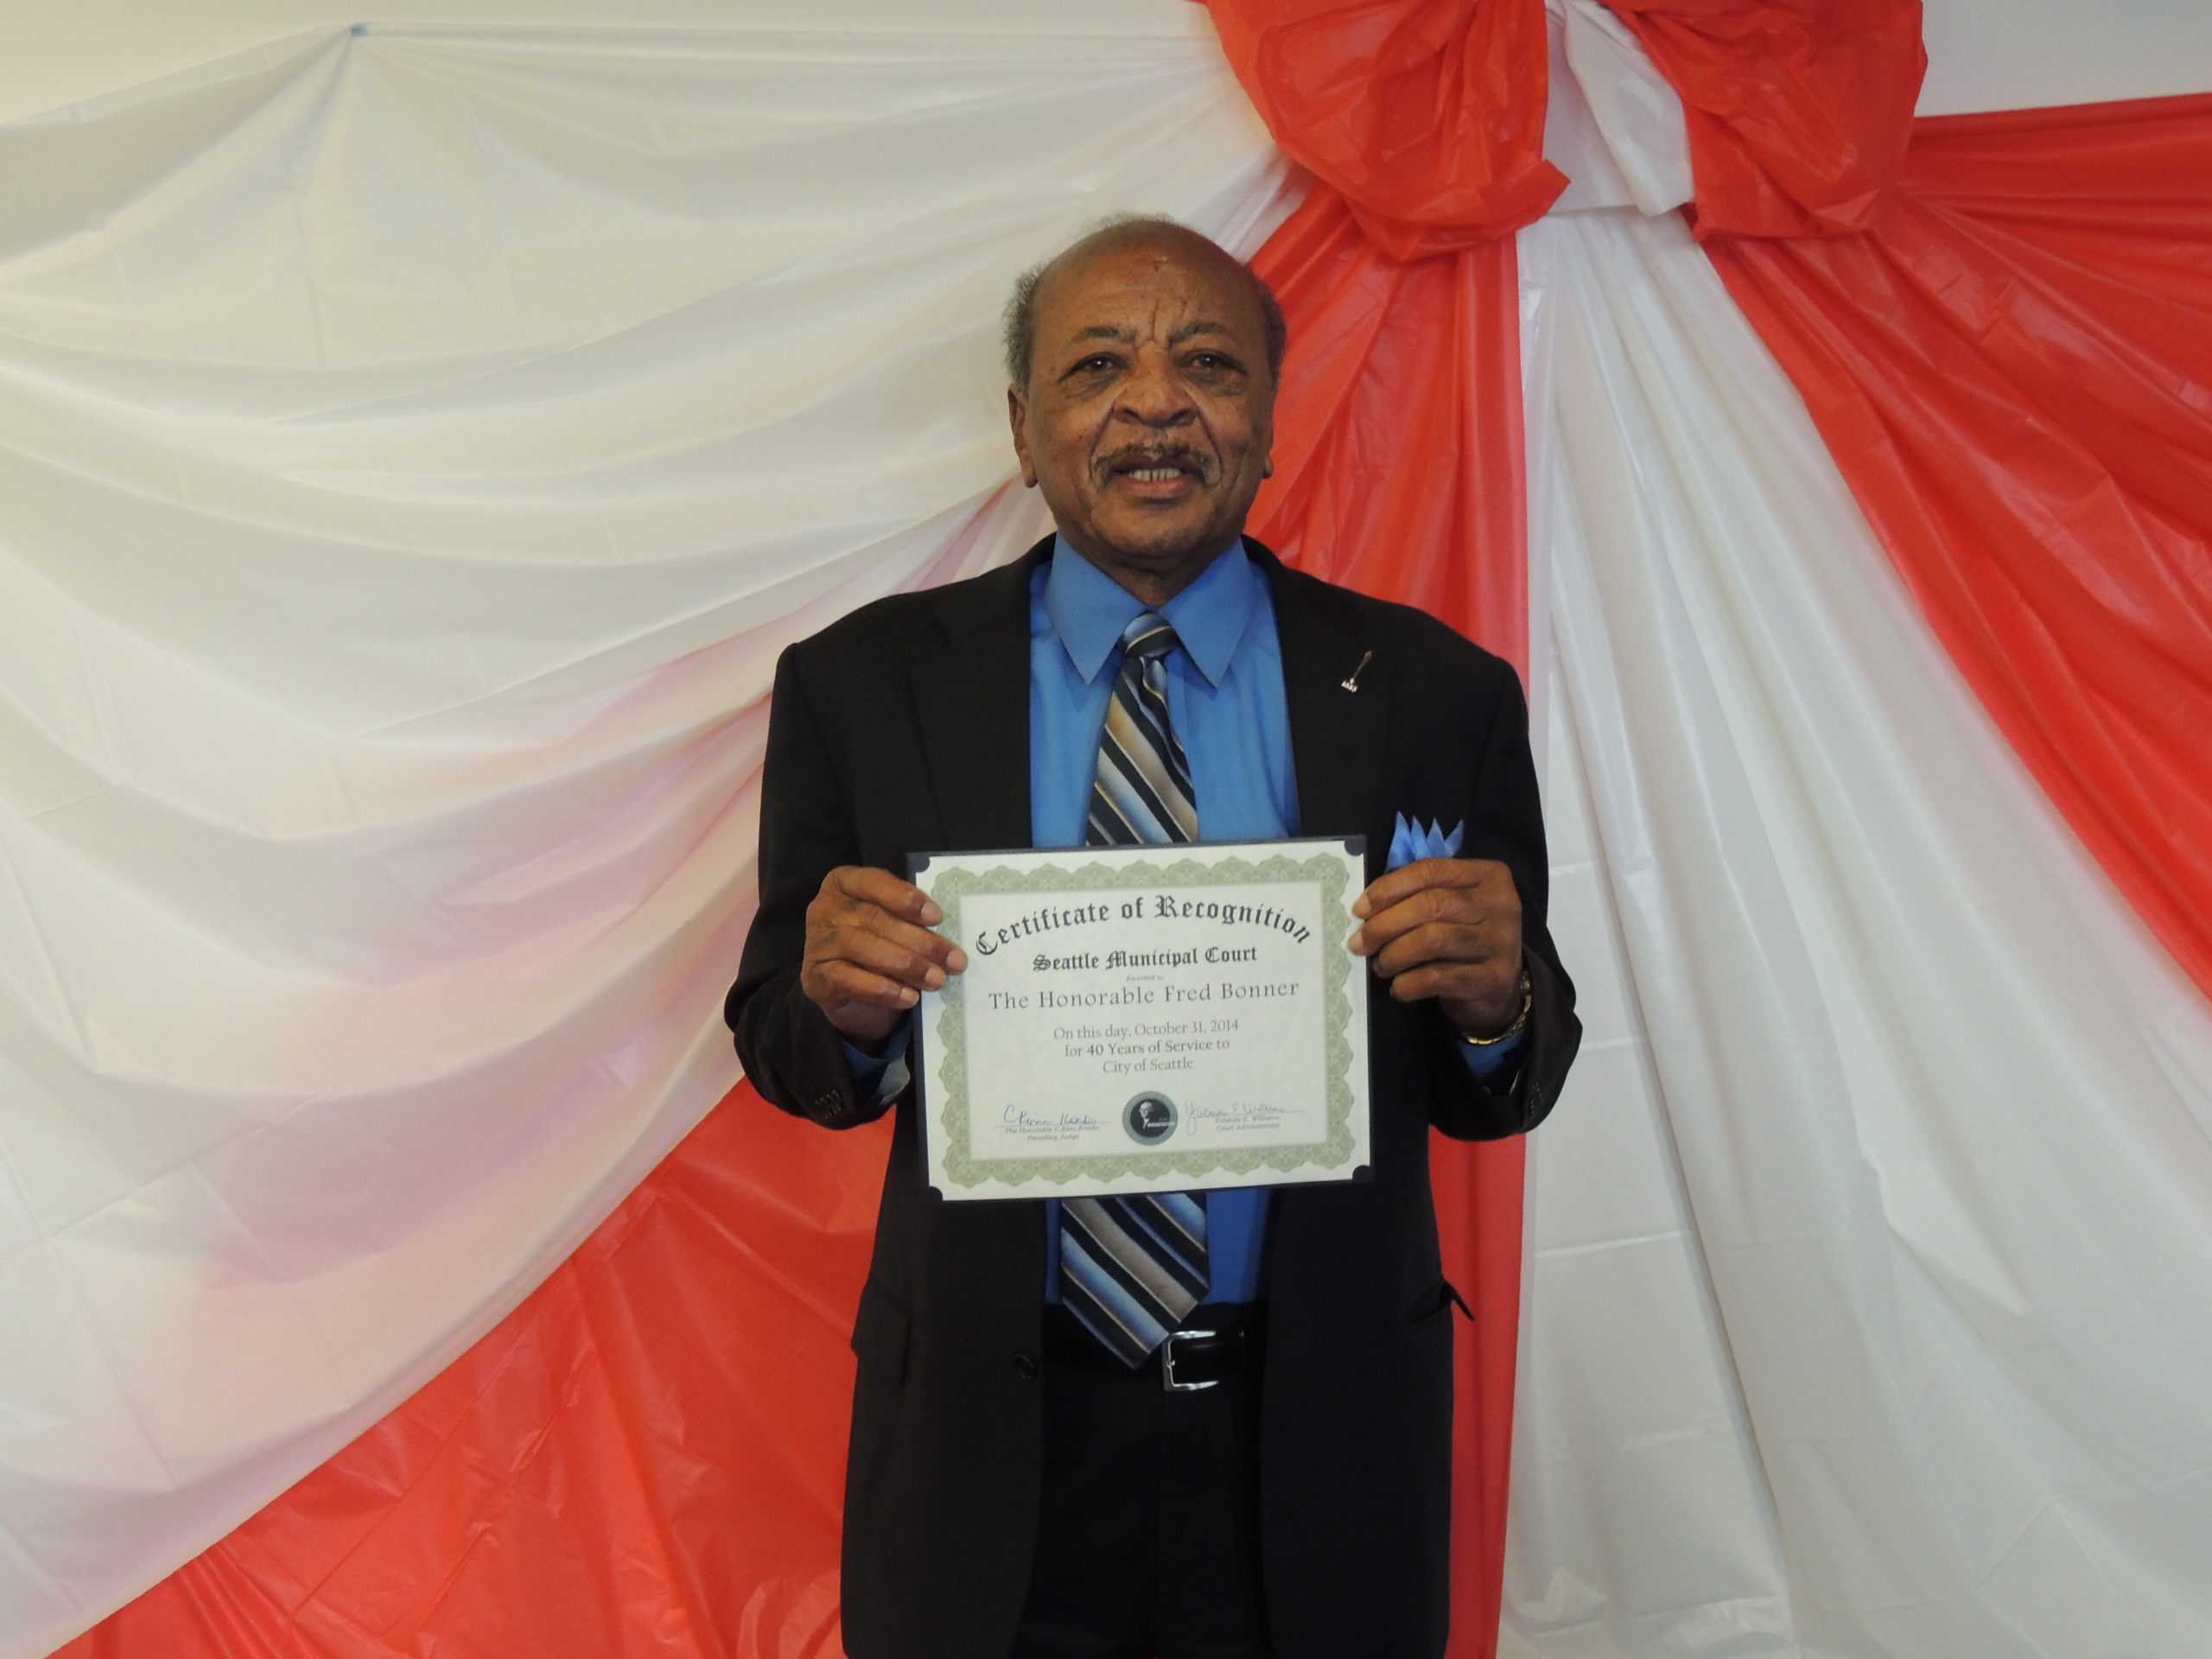 Judge Bonner smiling with his 40 years of service award certificate